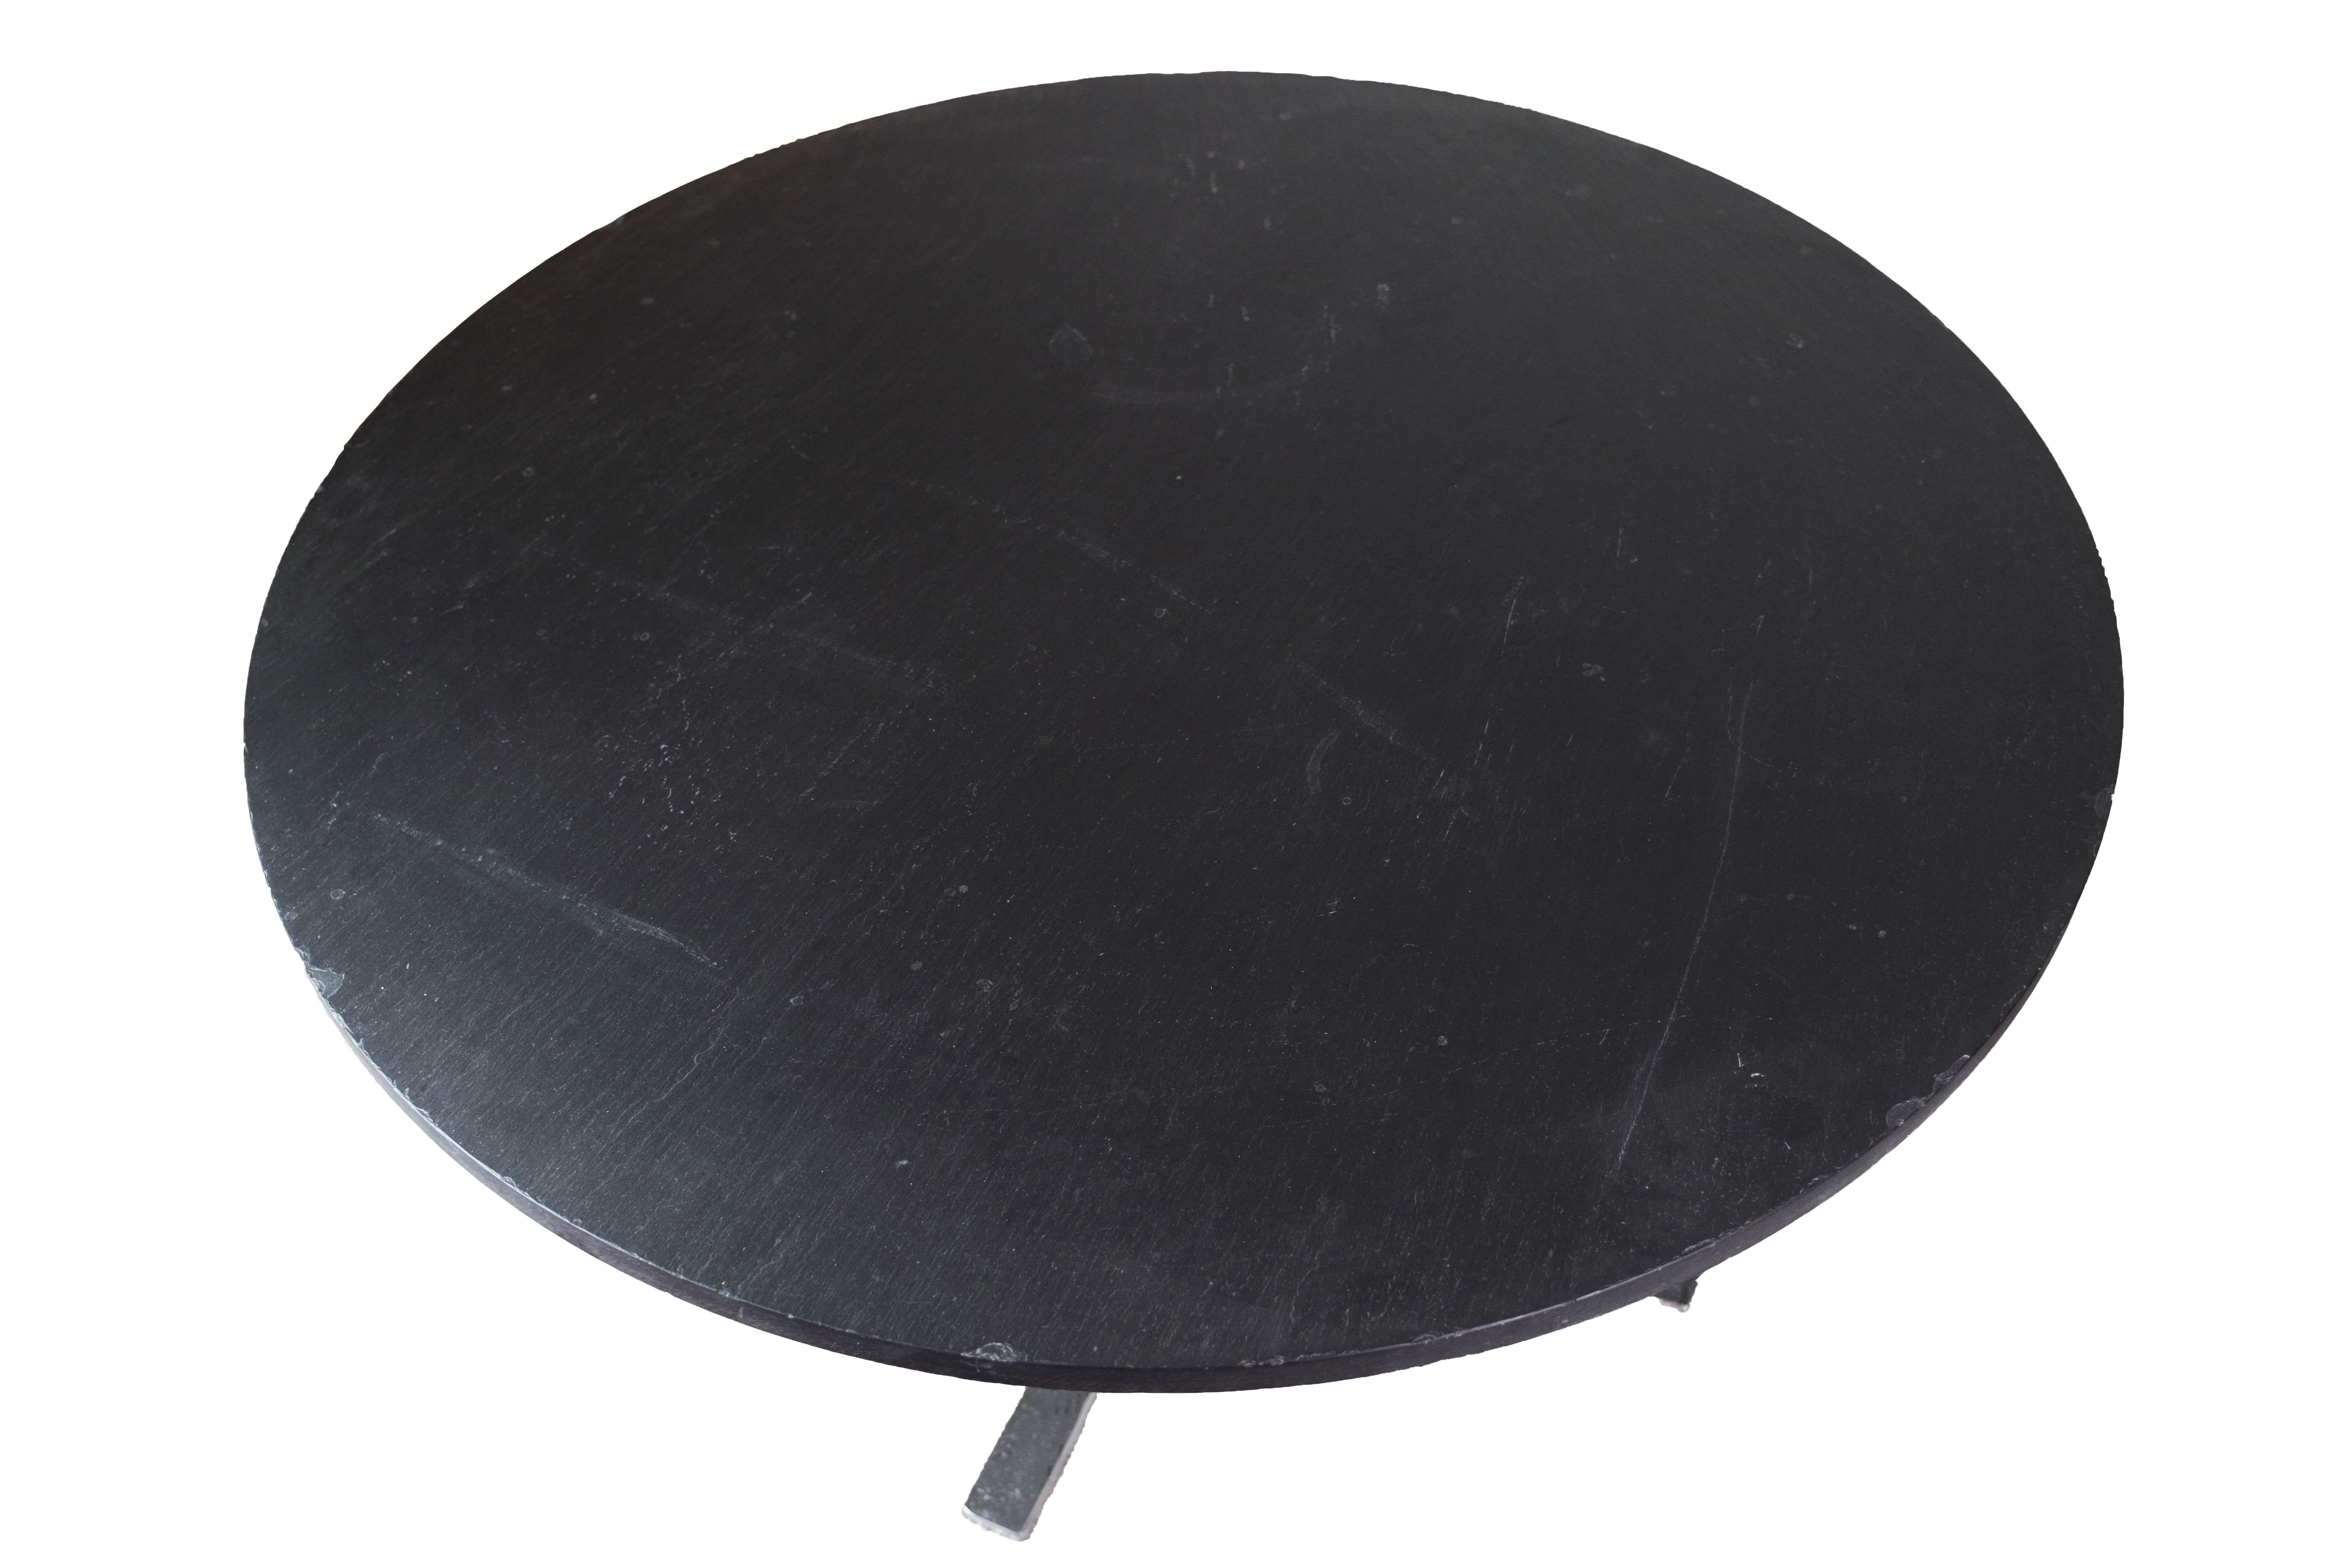 
This round coffee table with a black slate plate, designed by Sigurd Ressell Falcon in the 1960s, is a striking piece that encapsulates the essence of mid-century modern design.

Crafted with clean lines and minimalist aesthetics, this table exudes